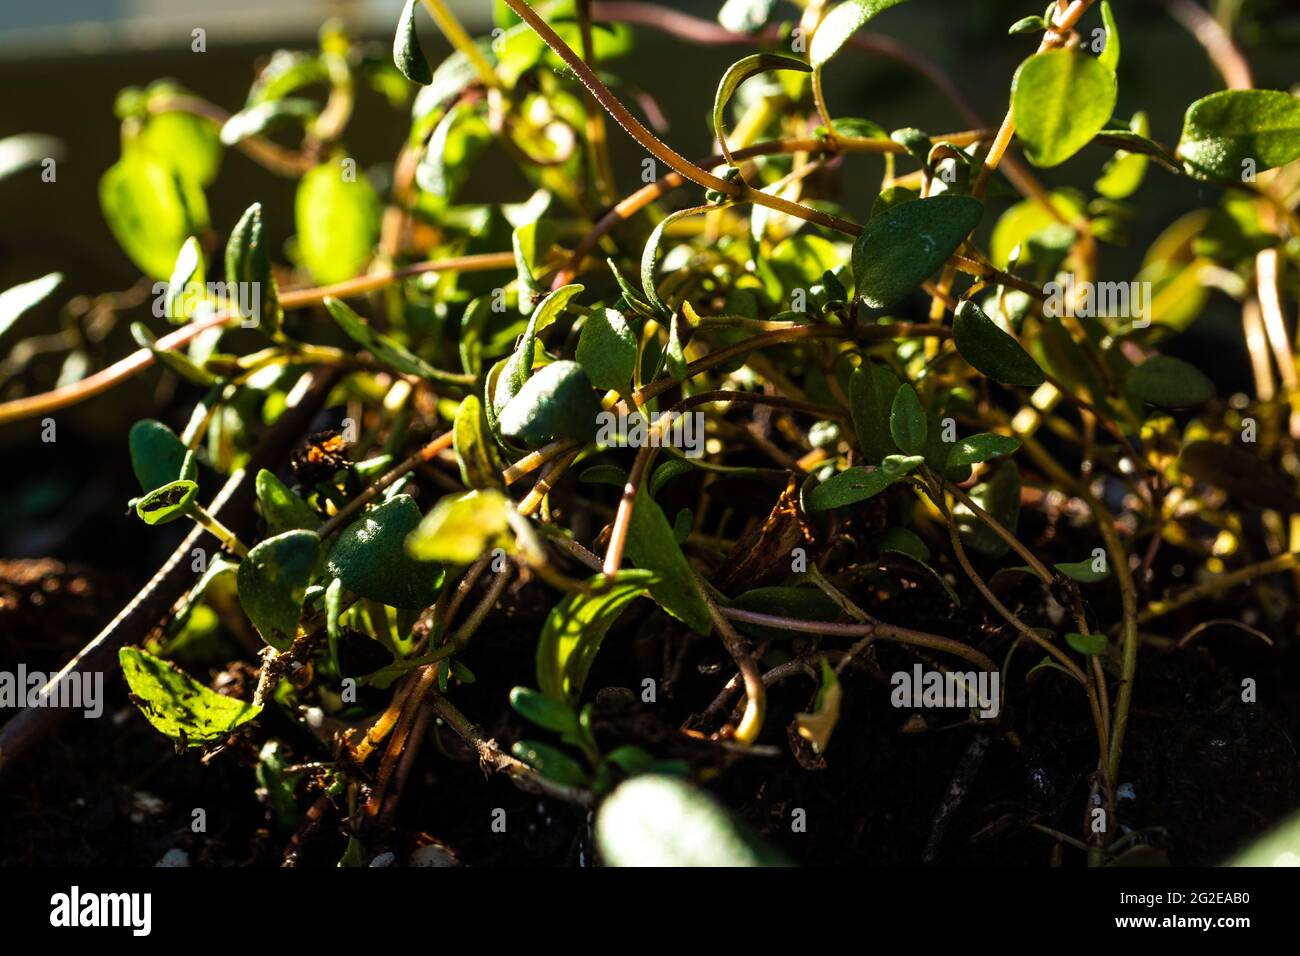 Macro Closeup of Tangled Stems and Leaves of Thyme Plant Stock Photo